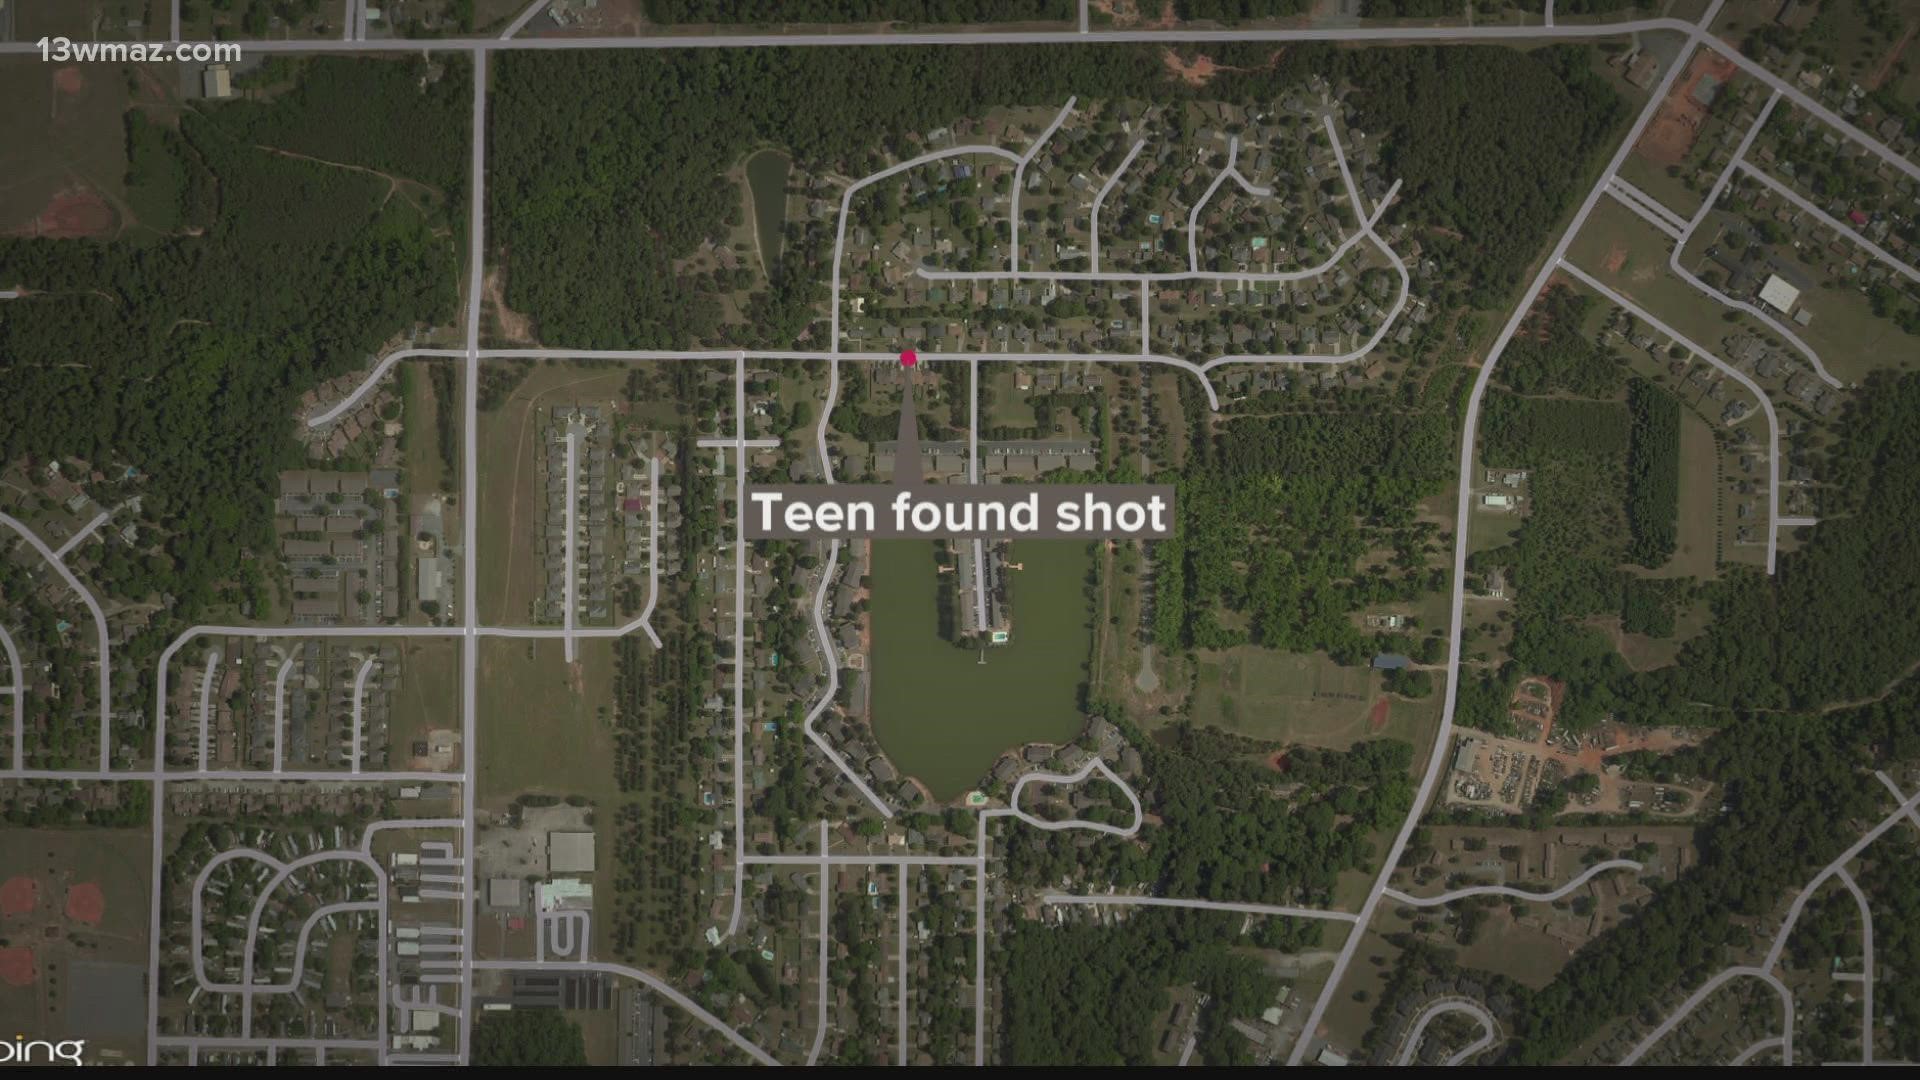 The teen is expected to survive the shooting.